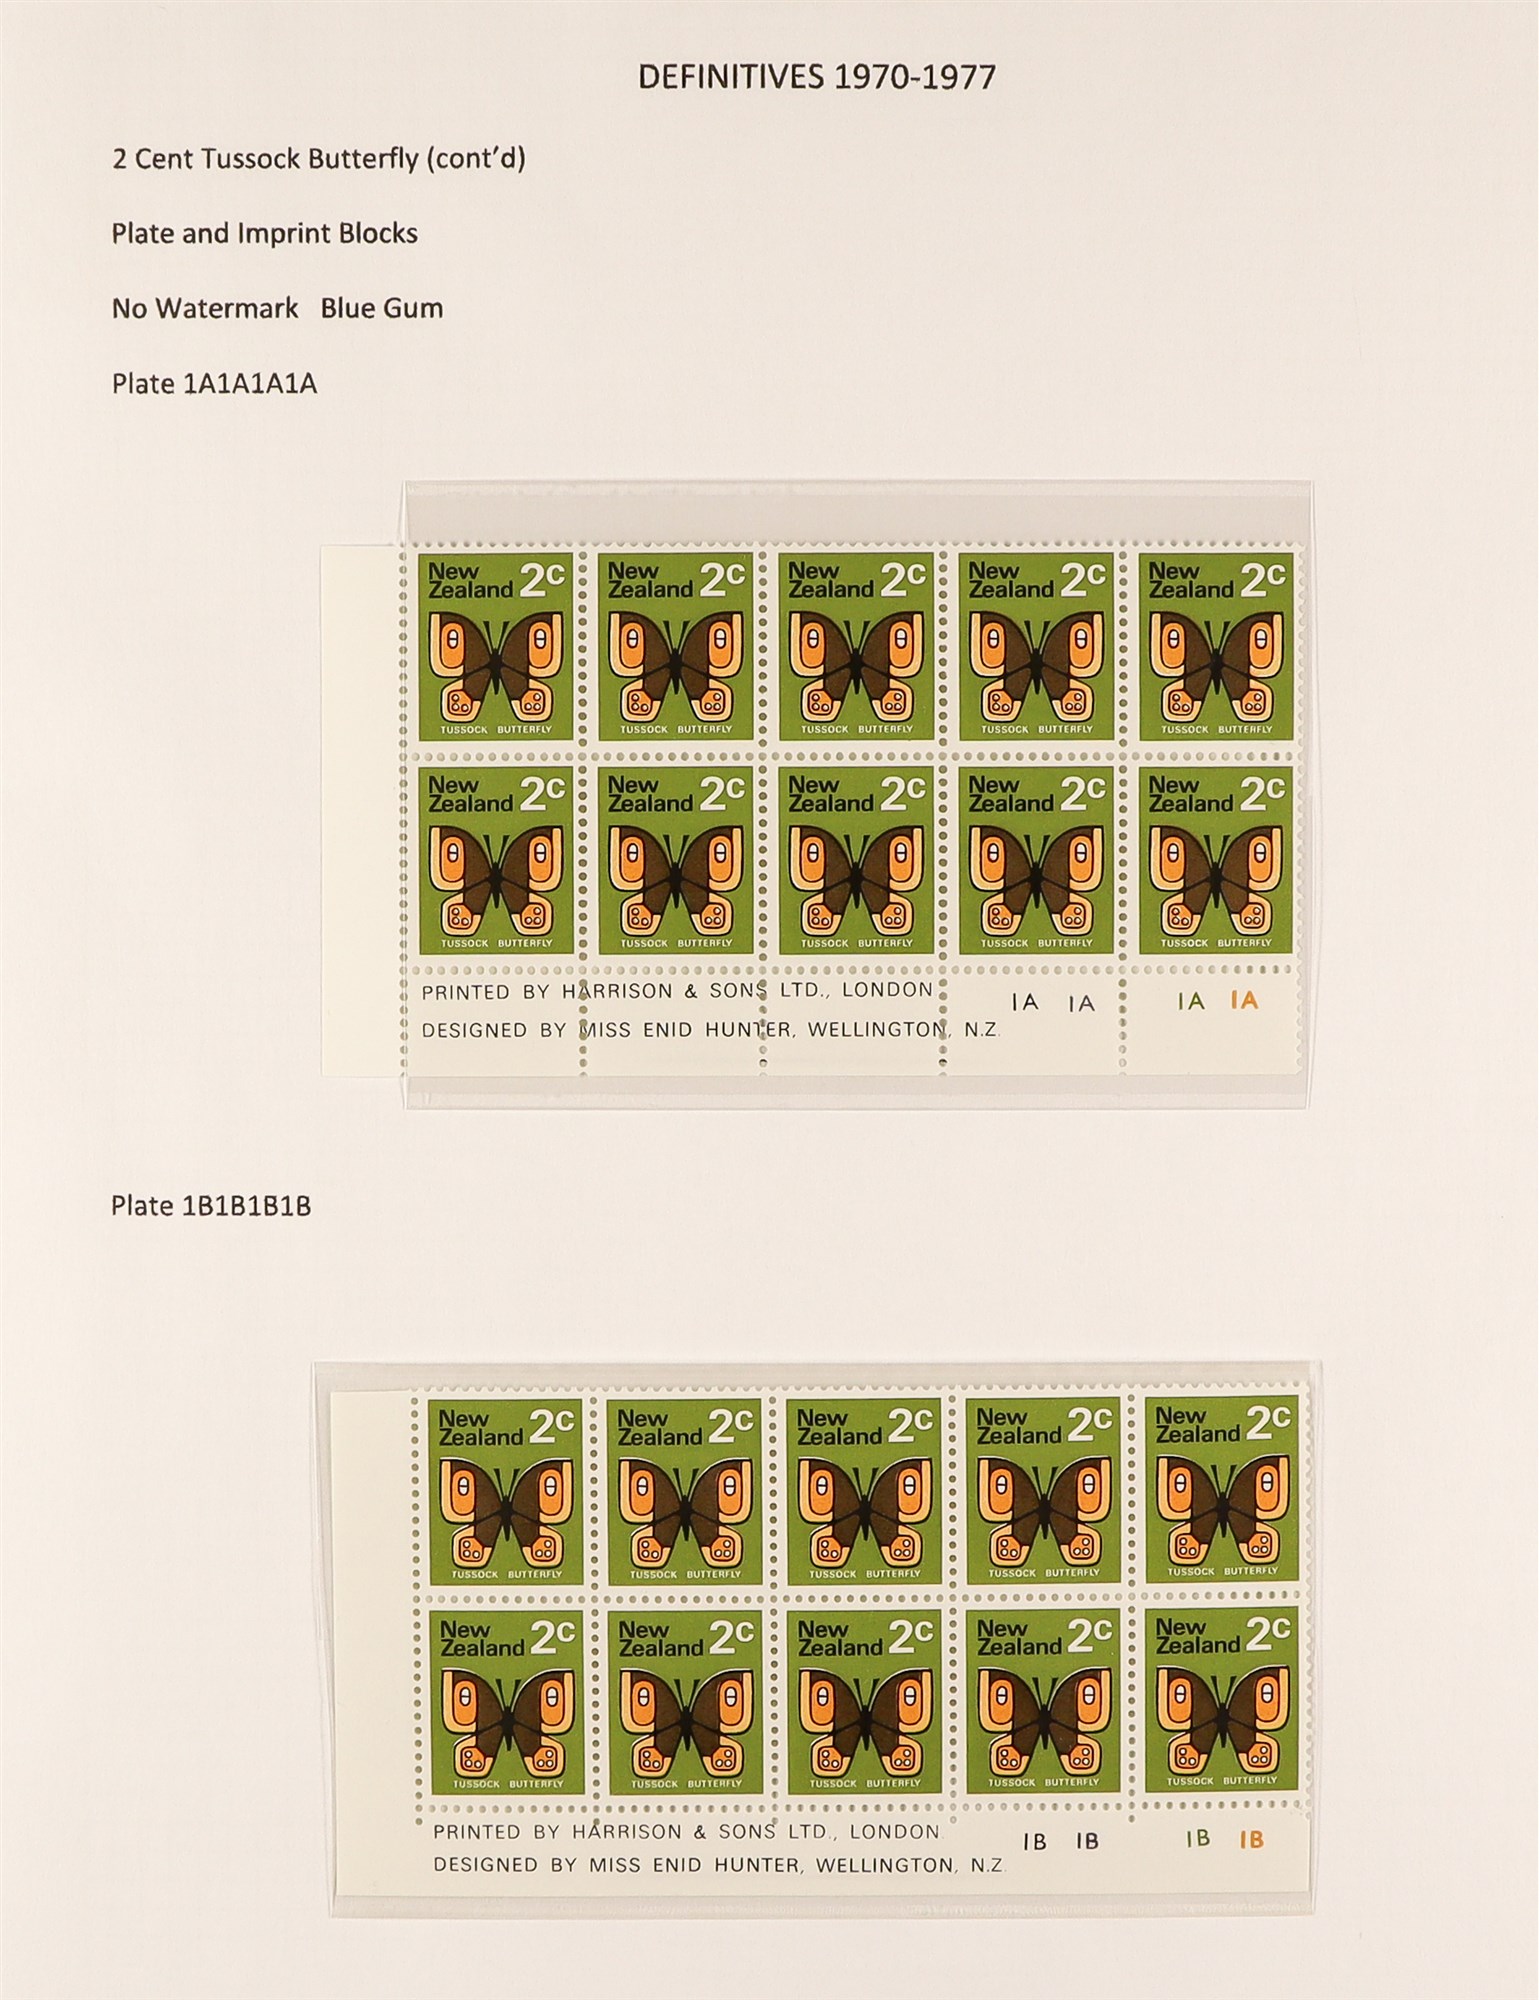 NEW ZEALAND 1970 - 1976 PICTORIALS SPECIALIZED COLLECTION of 110+ never hinged mint plate + - Image 2 of 11